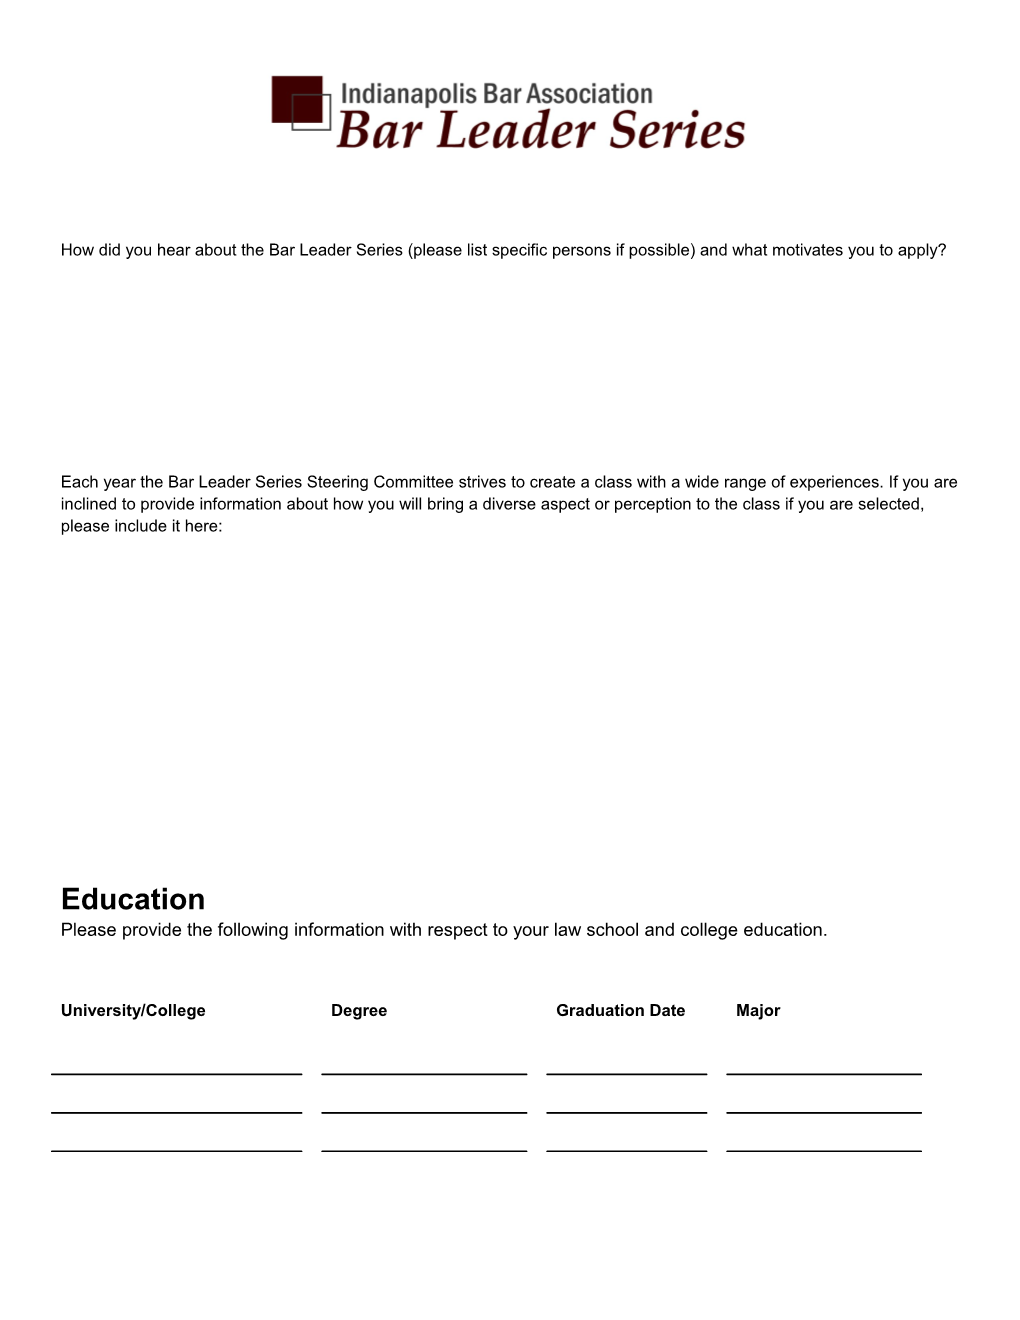 Please Type Responses in the Grey Boxes on This Form